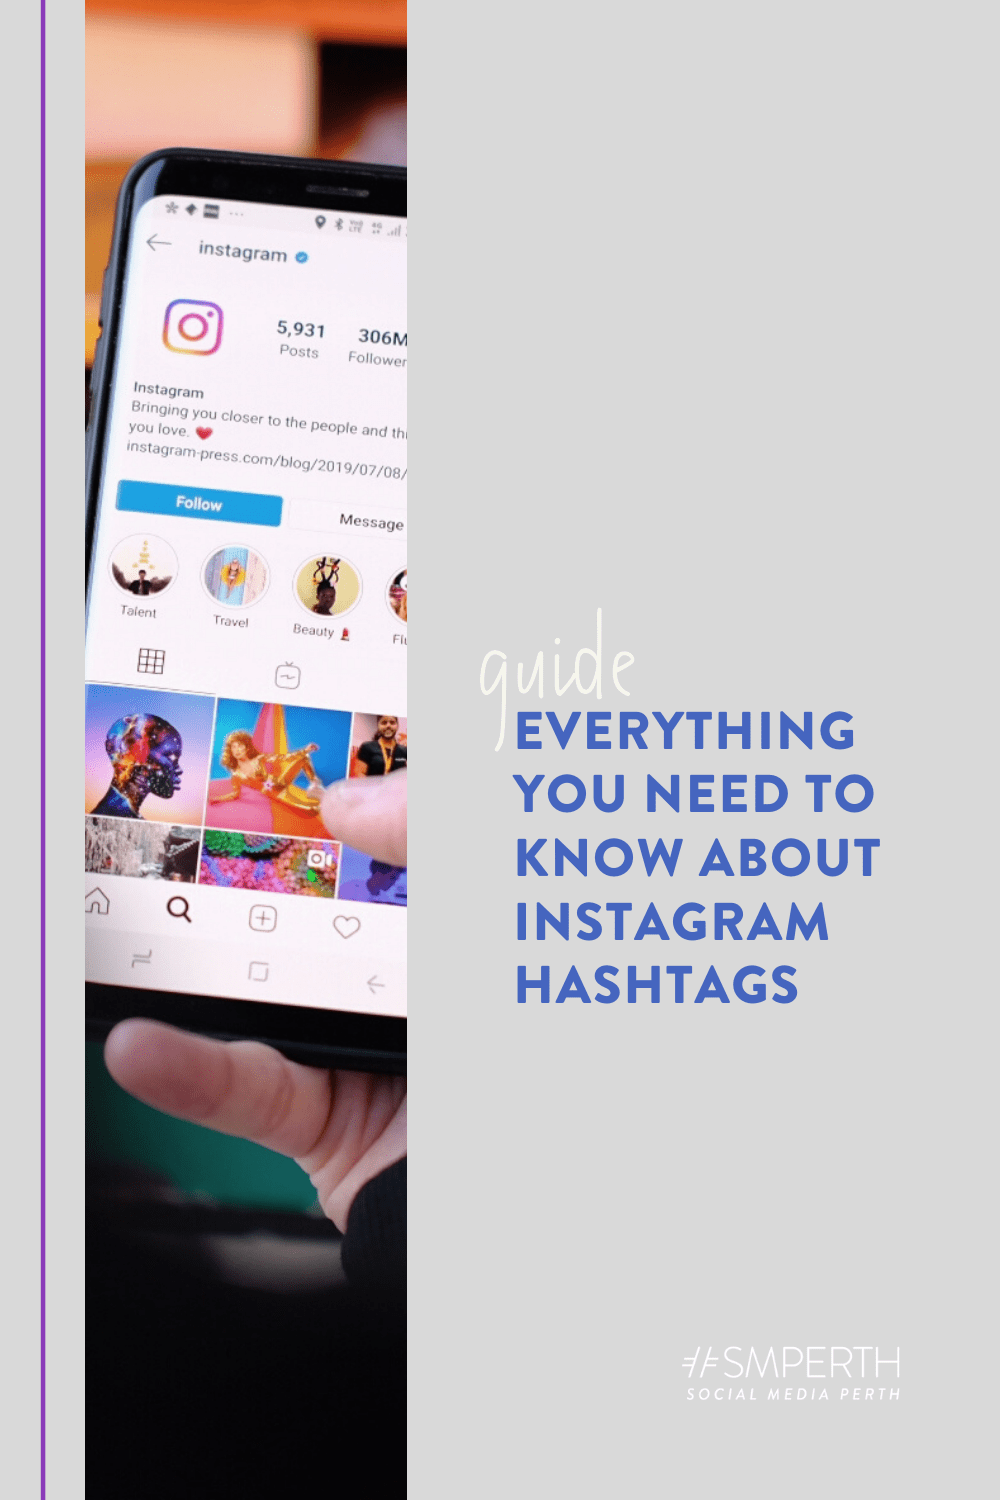 10 ways to use hashtags to grow Instagram